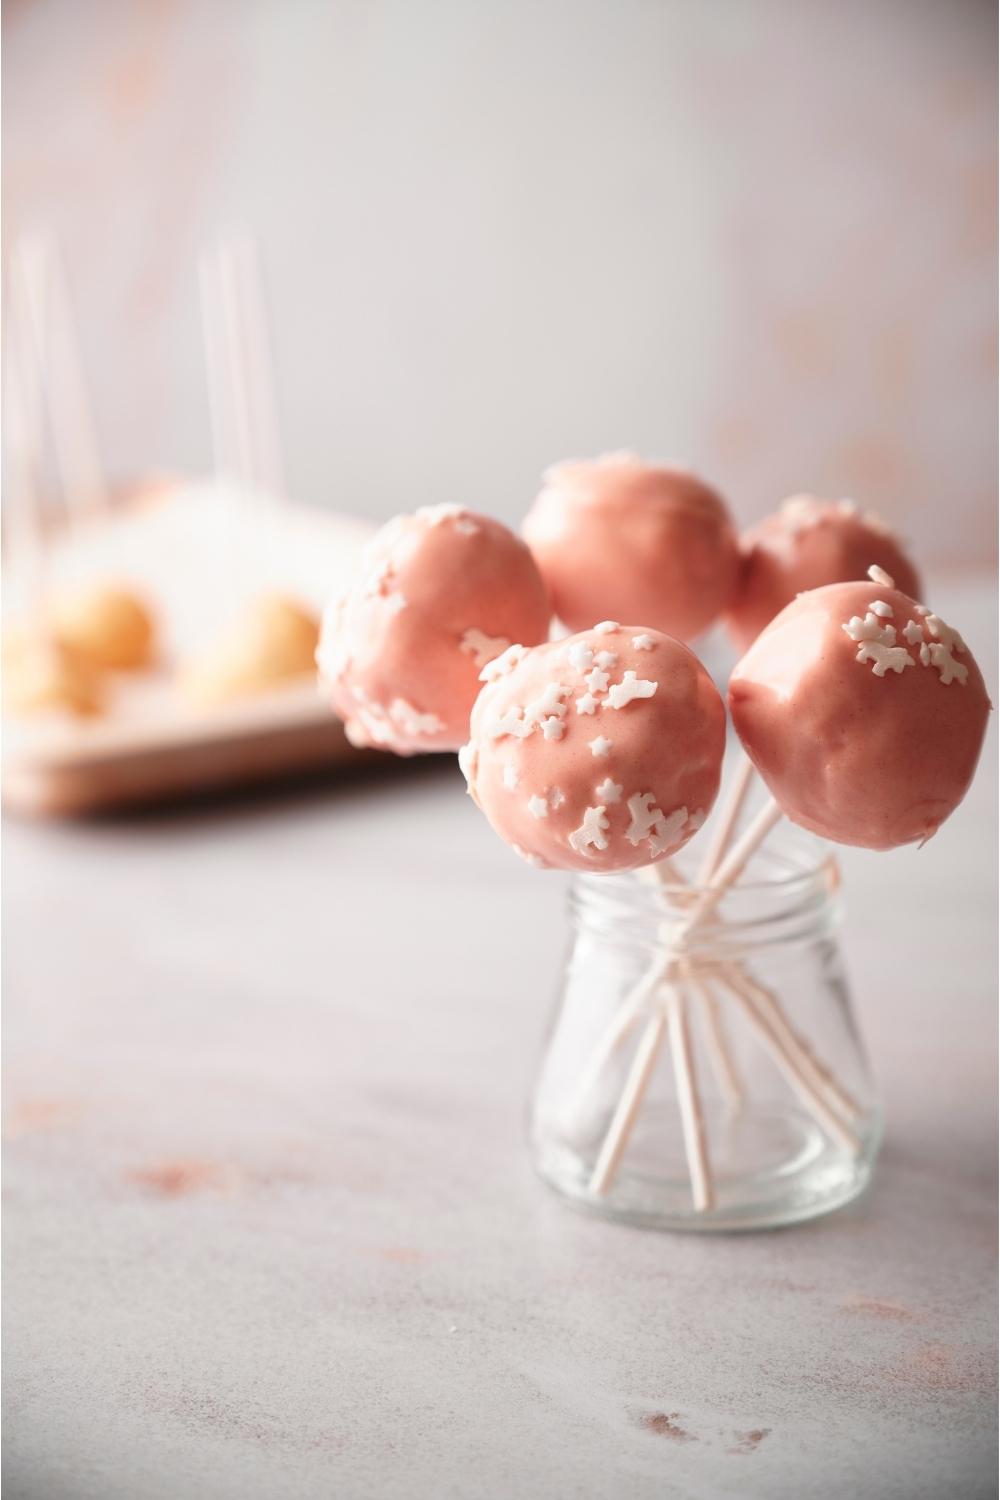 Starbucks cake pops in a clear jar with more cake pops in the background.